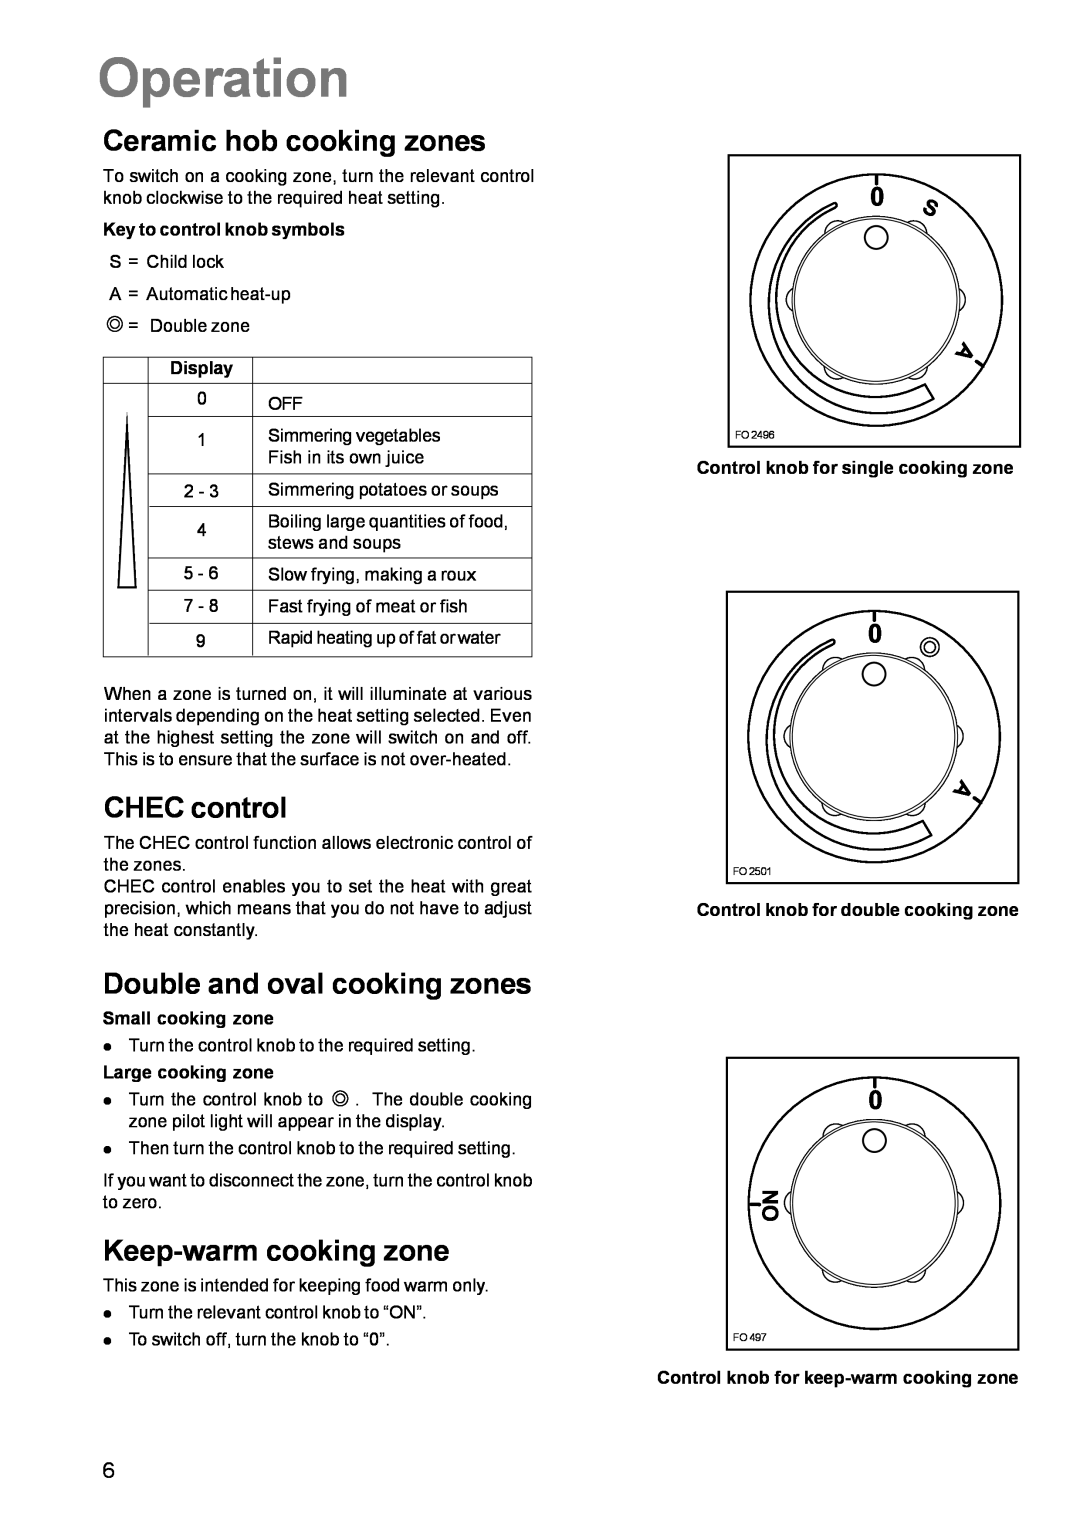 Zanussi ZCE 700 Operation, CHEC control, Double and oval cooking zones, Keep-warm cooking zone, Ceramic hob cooking zones 